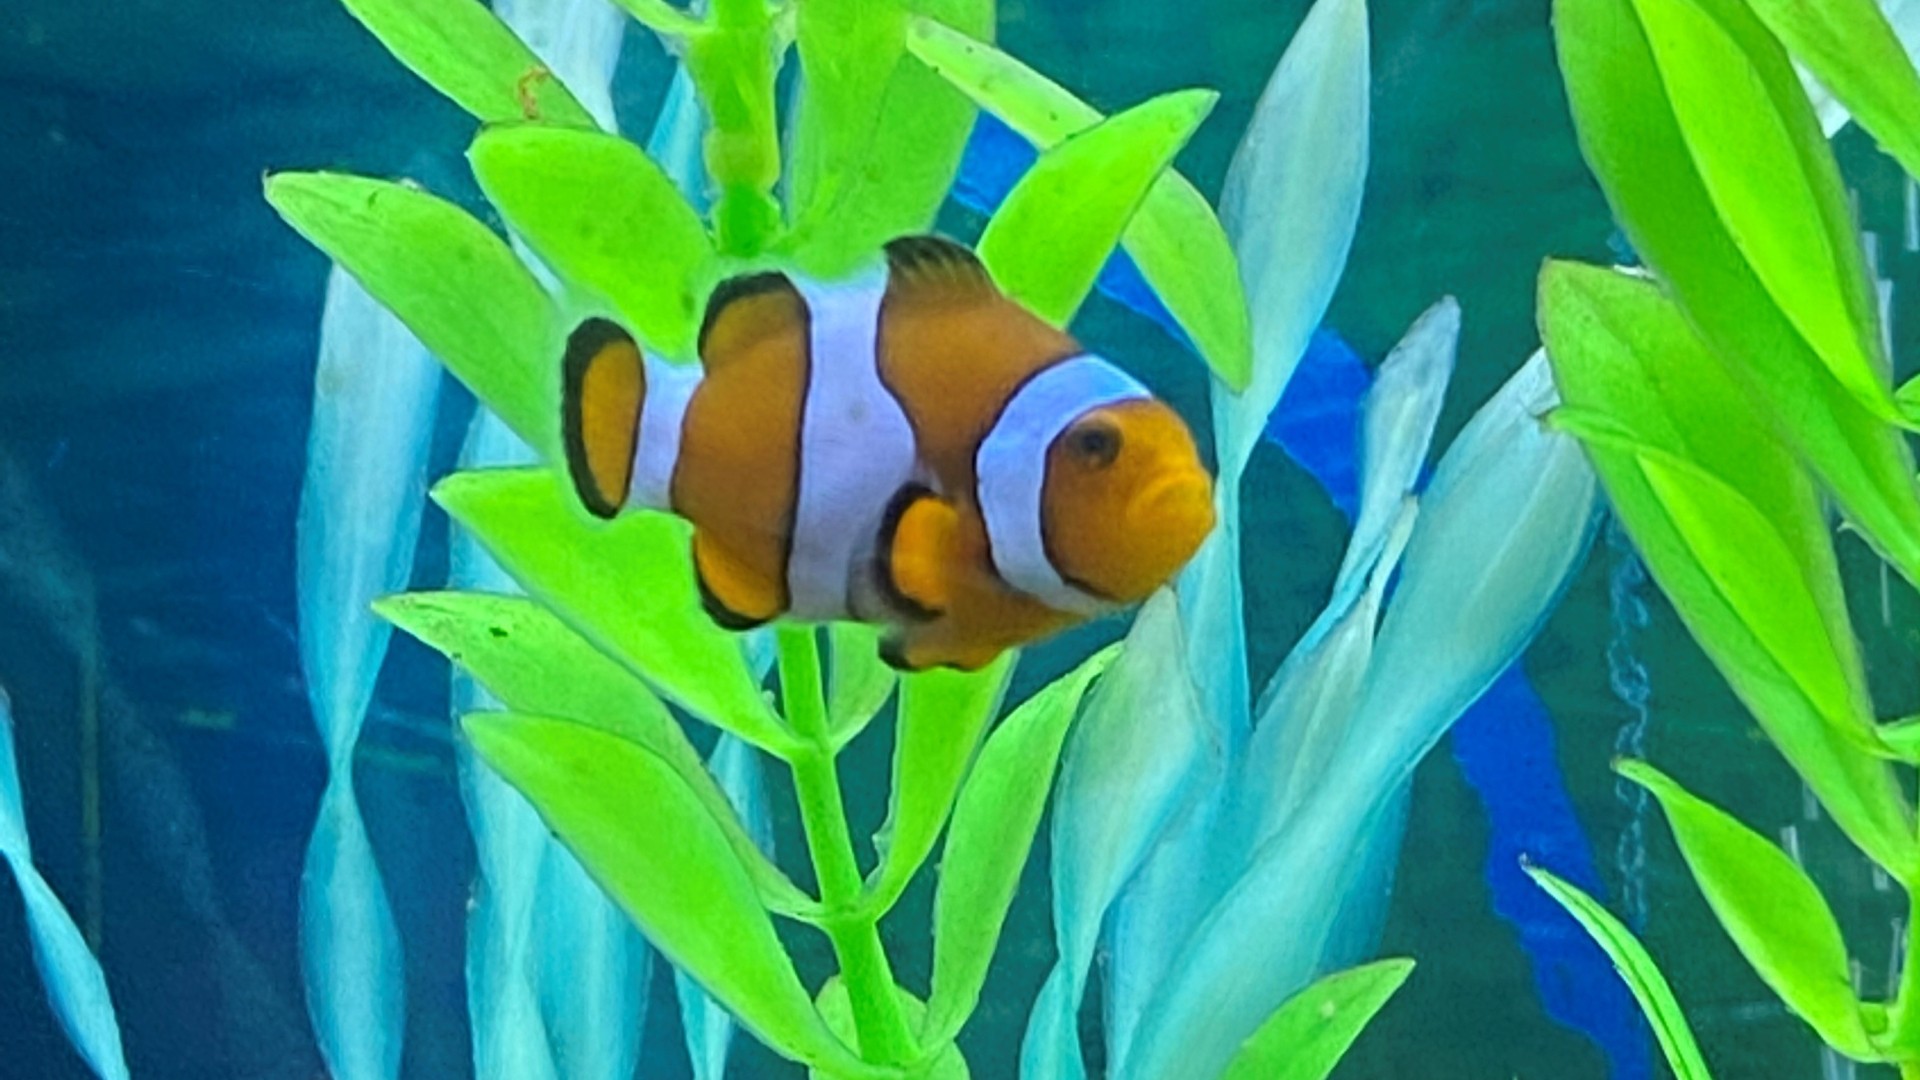 A clownfish swimming in a tank with ornamental plants